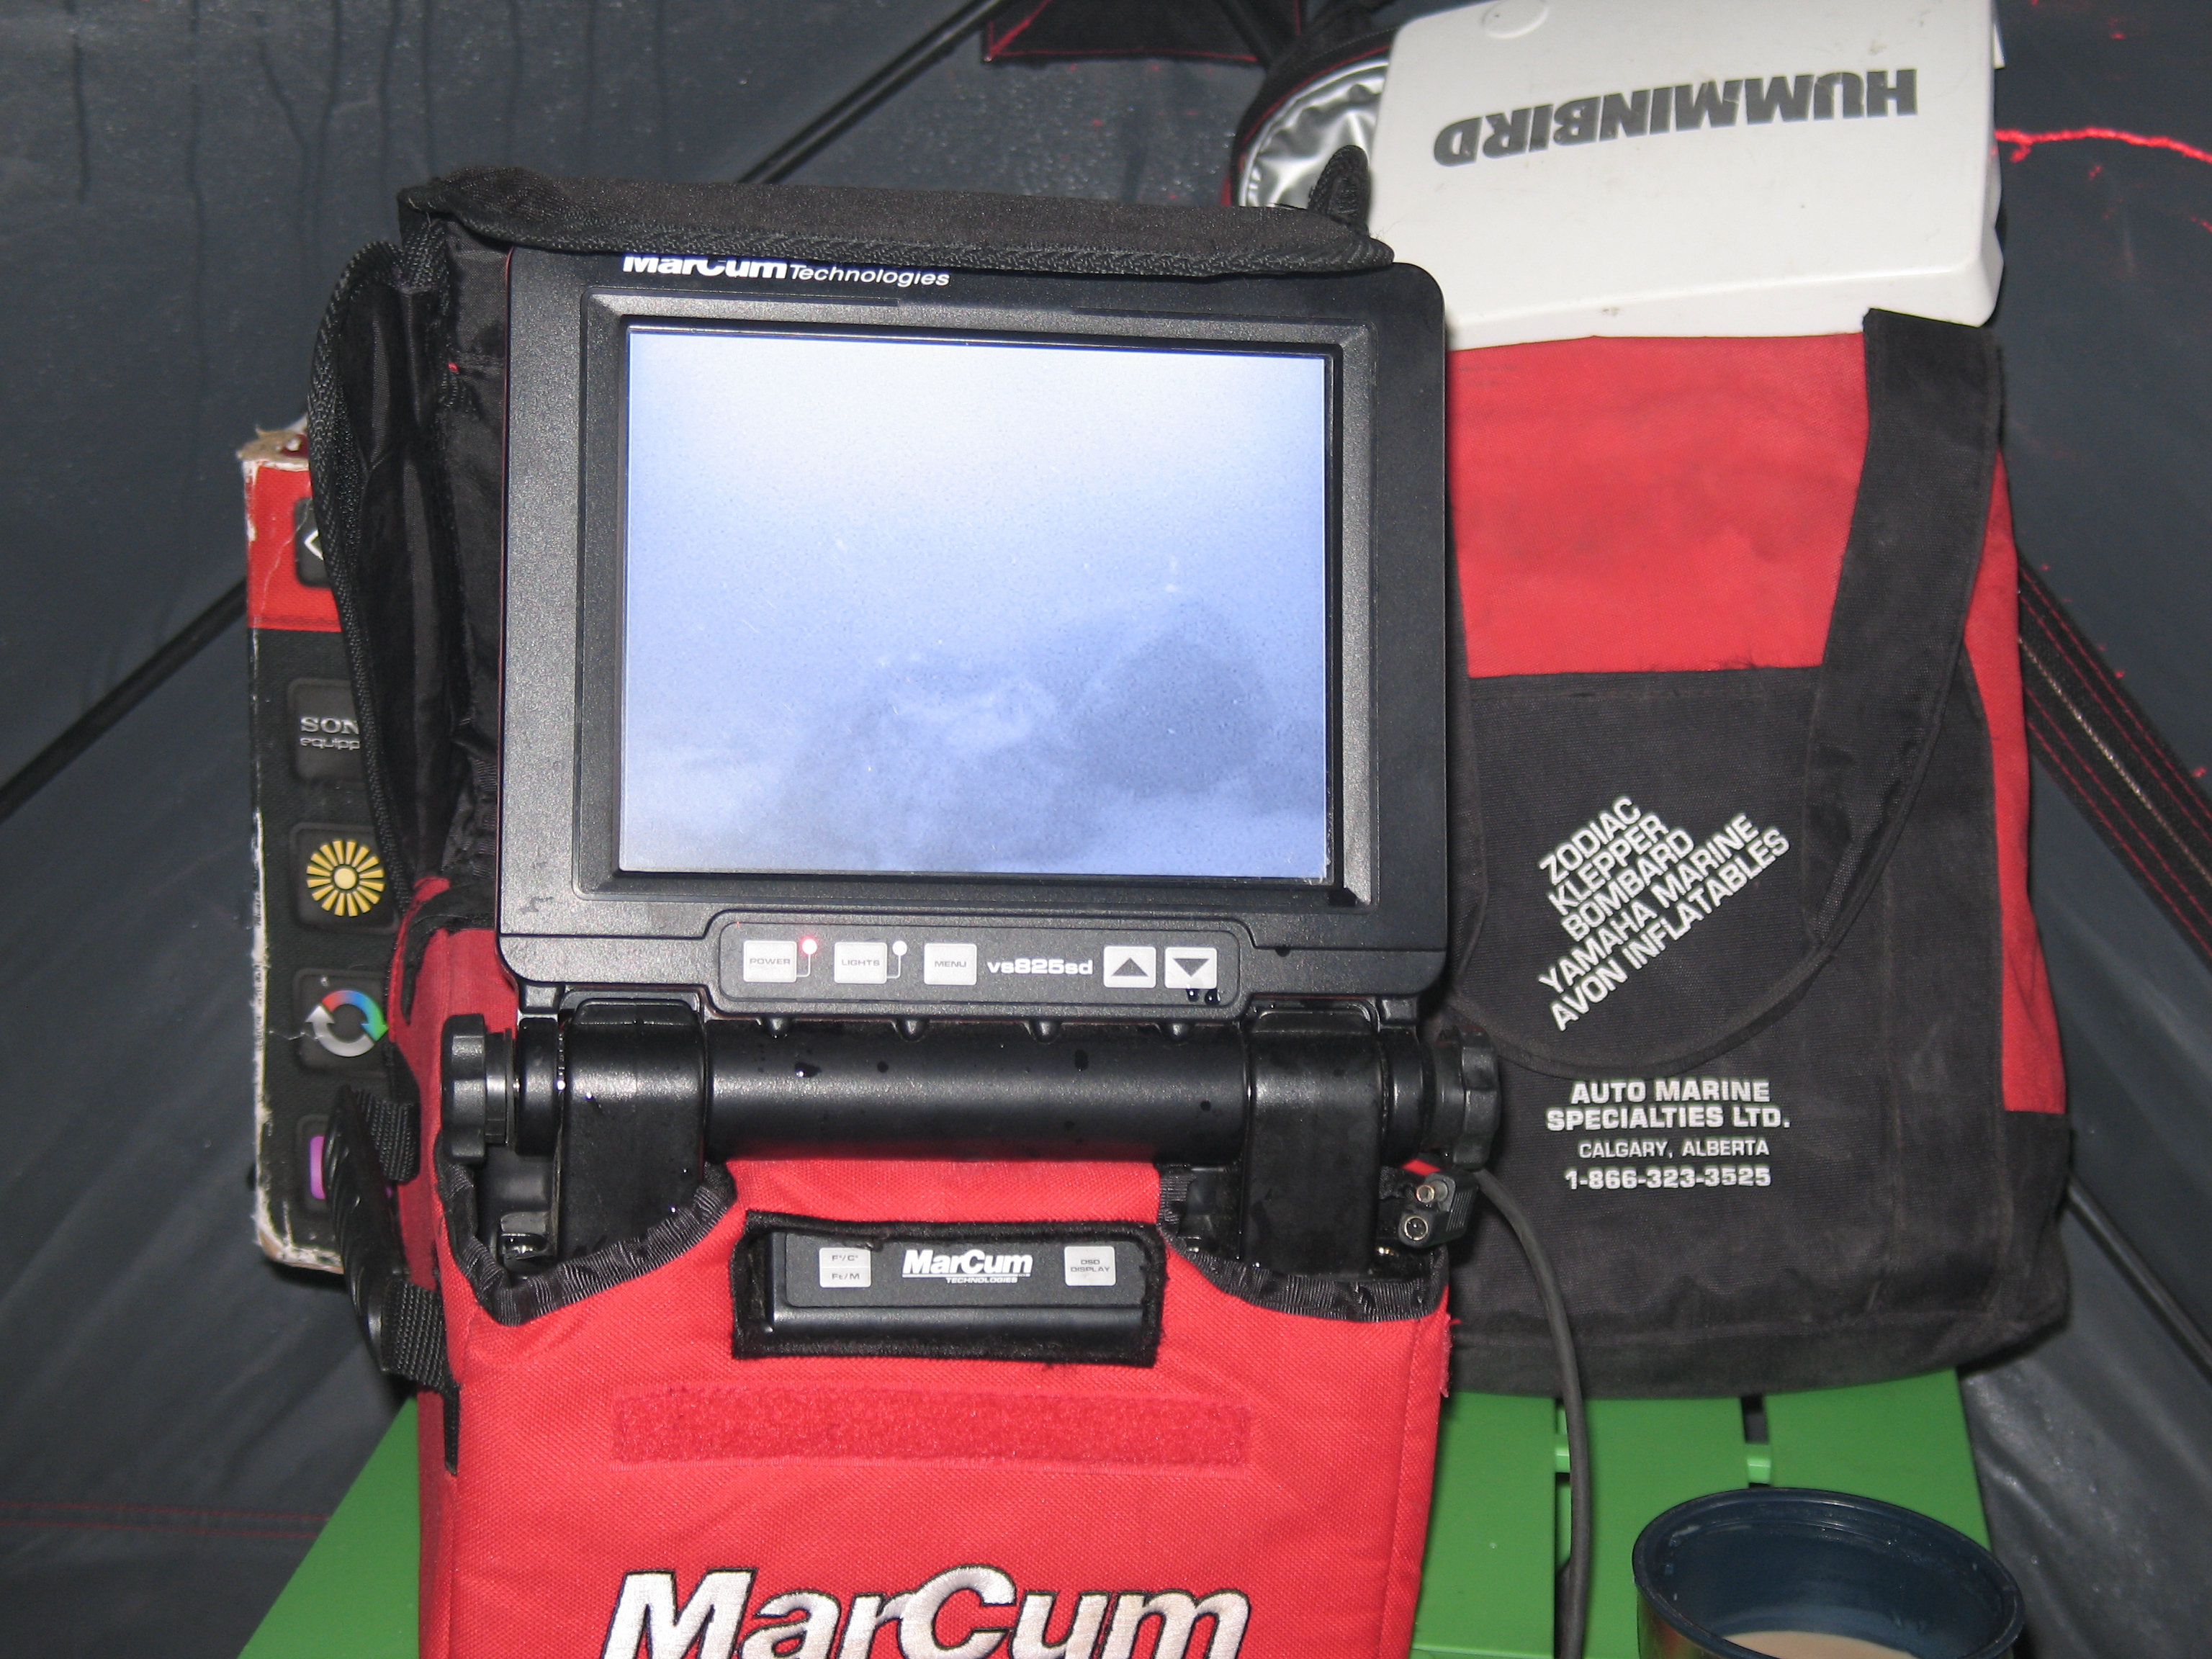 Underwater Cameras, Are they worth the $$? - Ice Fishing Forum